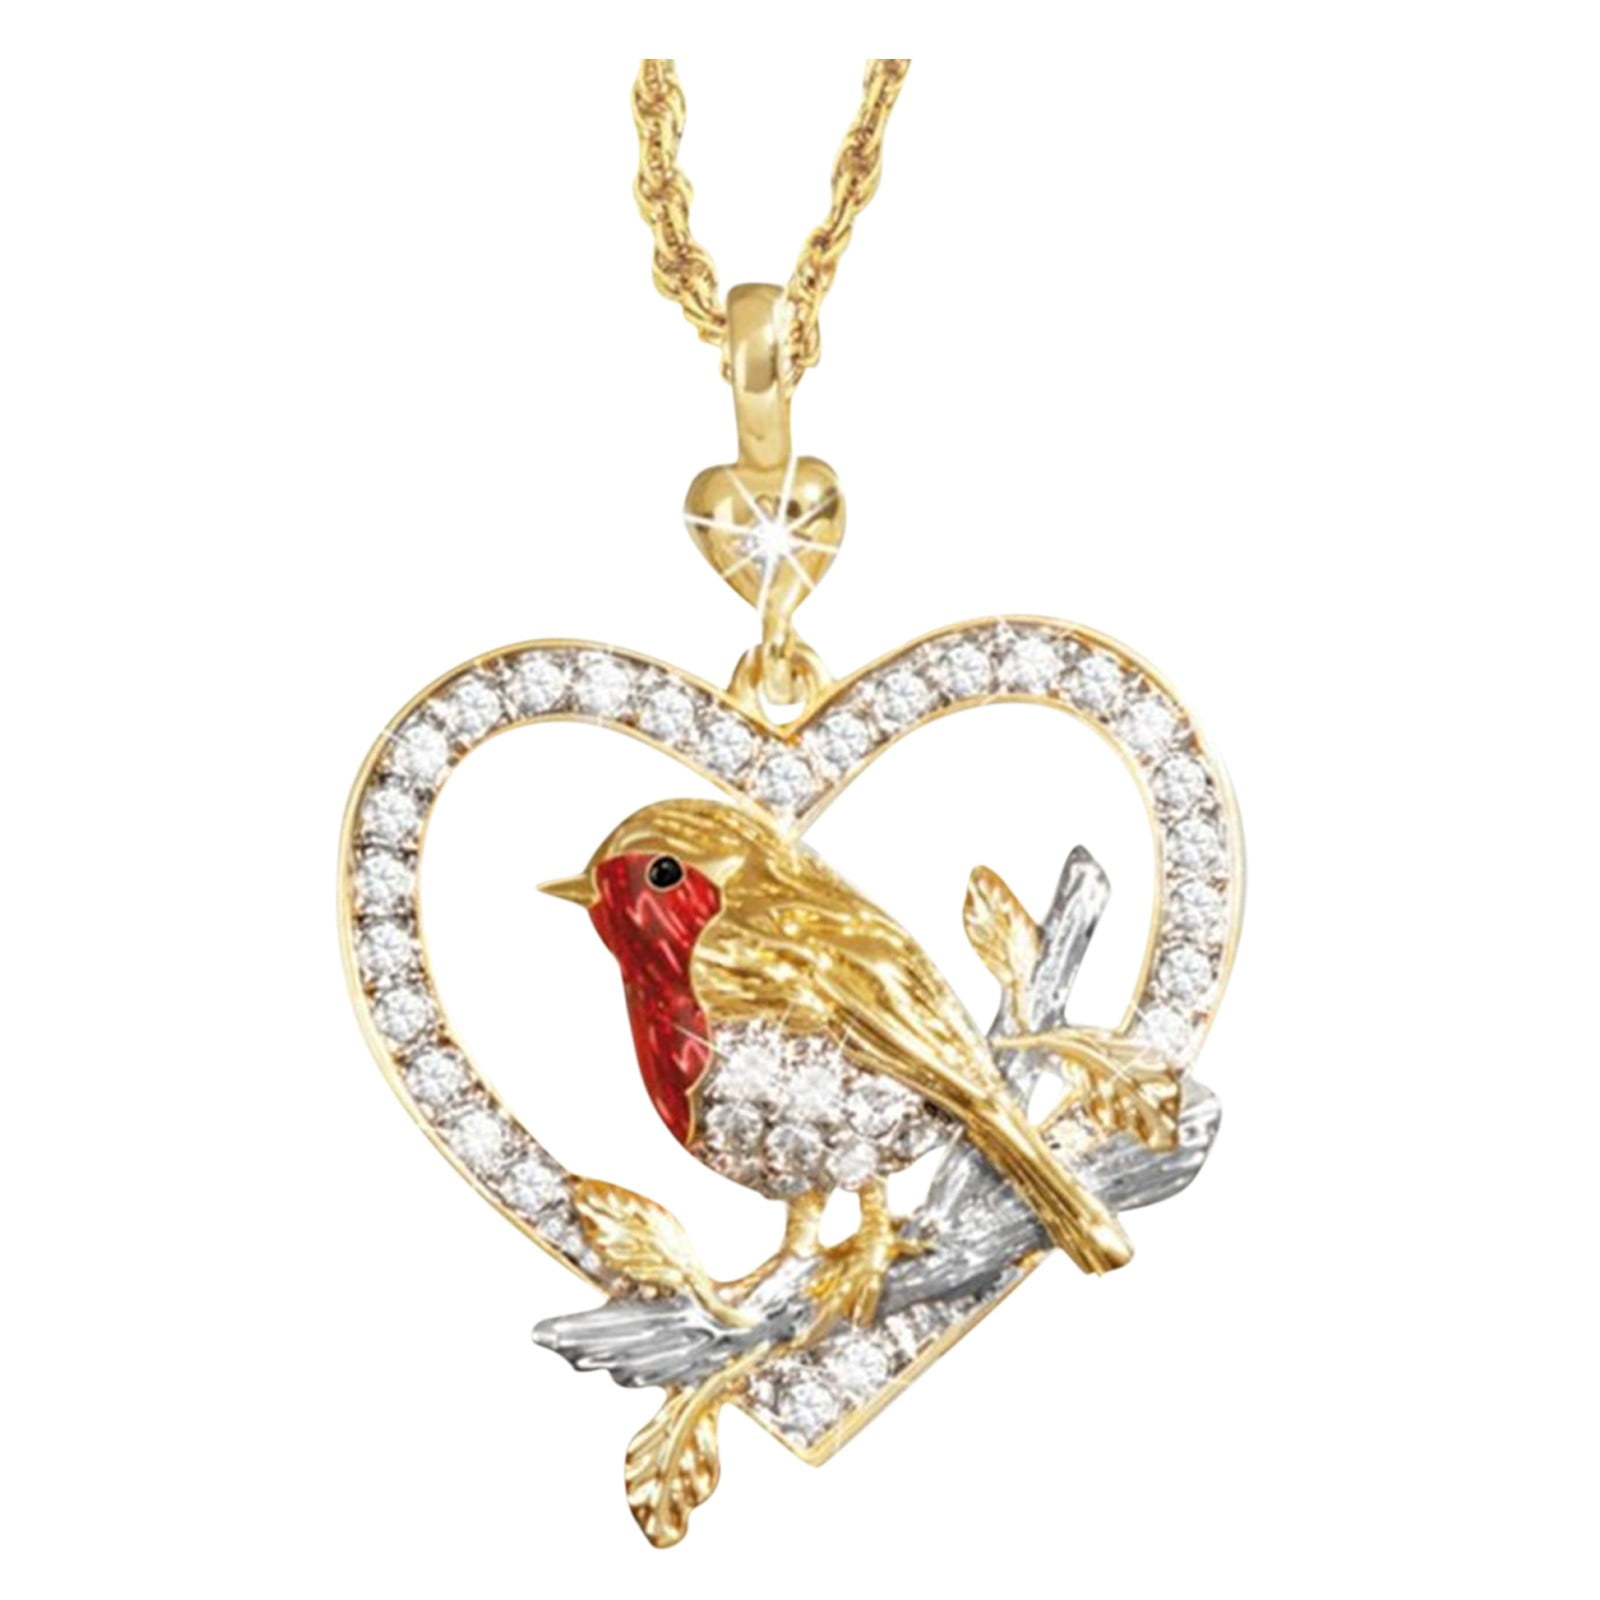 Heart-Shaped Crystal Glass Bird Necklace Red-Sparrow Memorial Pendant Girl Gift 